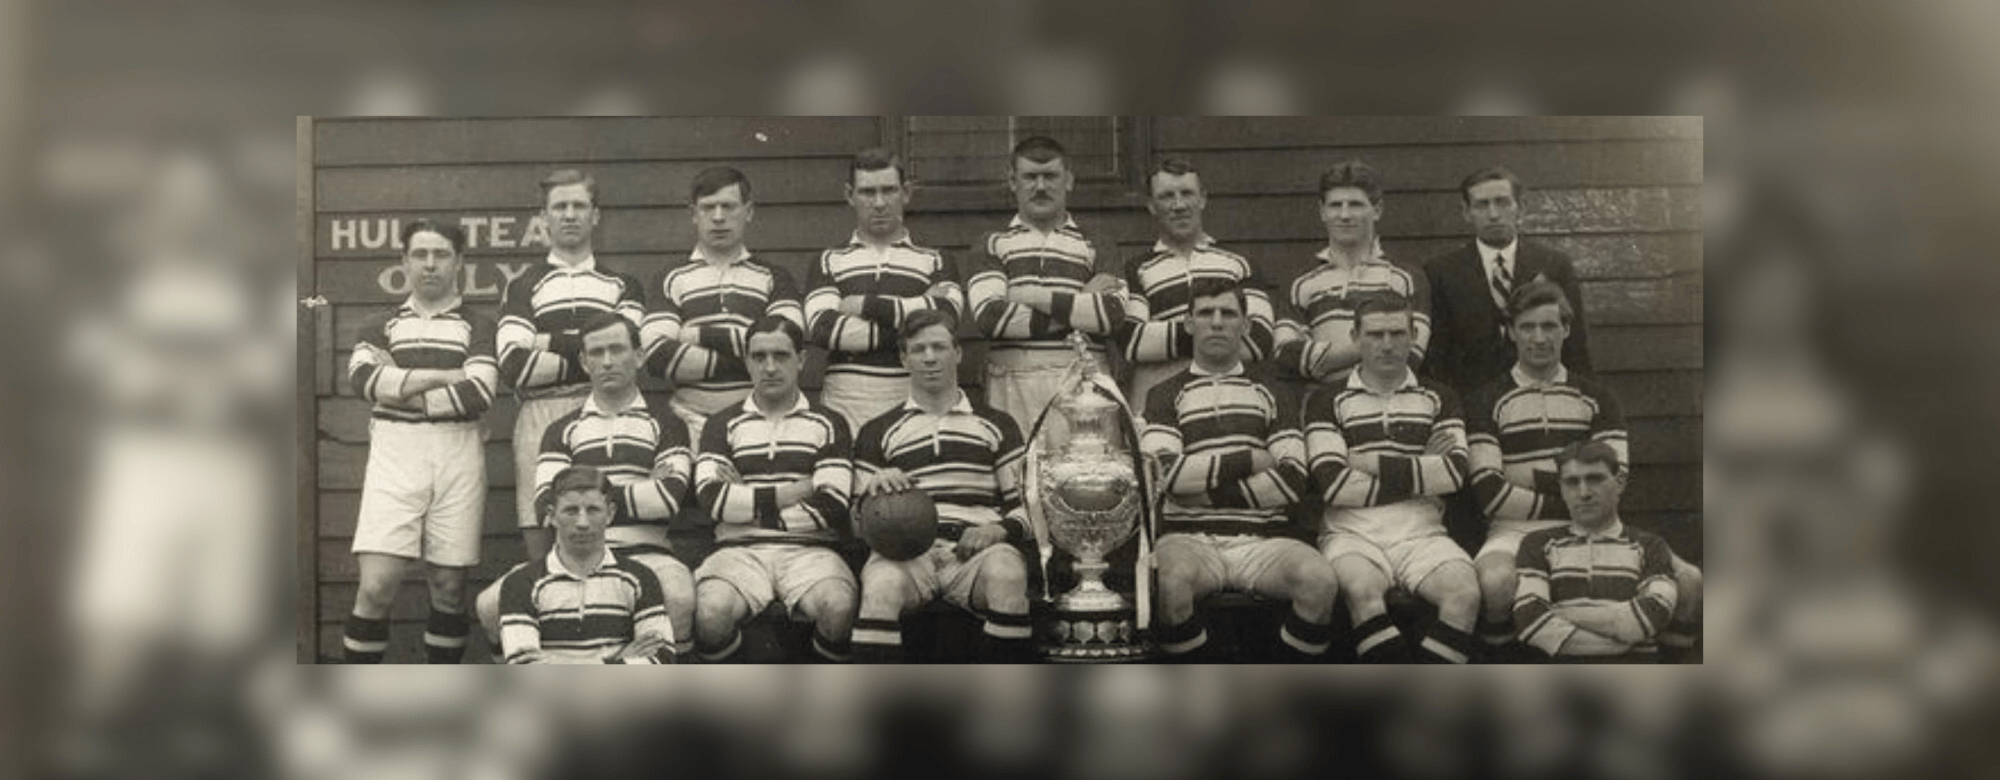 On This Day: Hull Win 1914 Challenge Cup Final